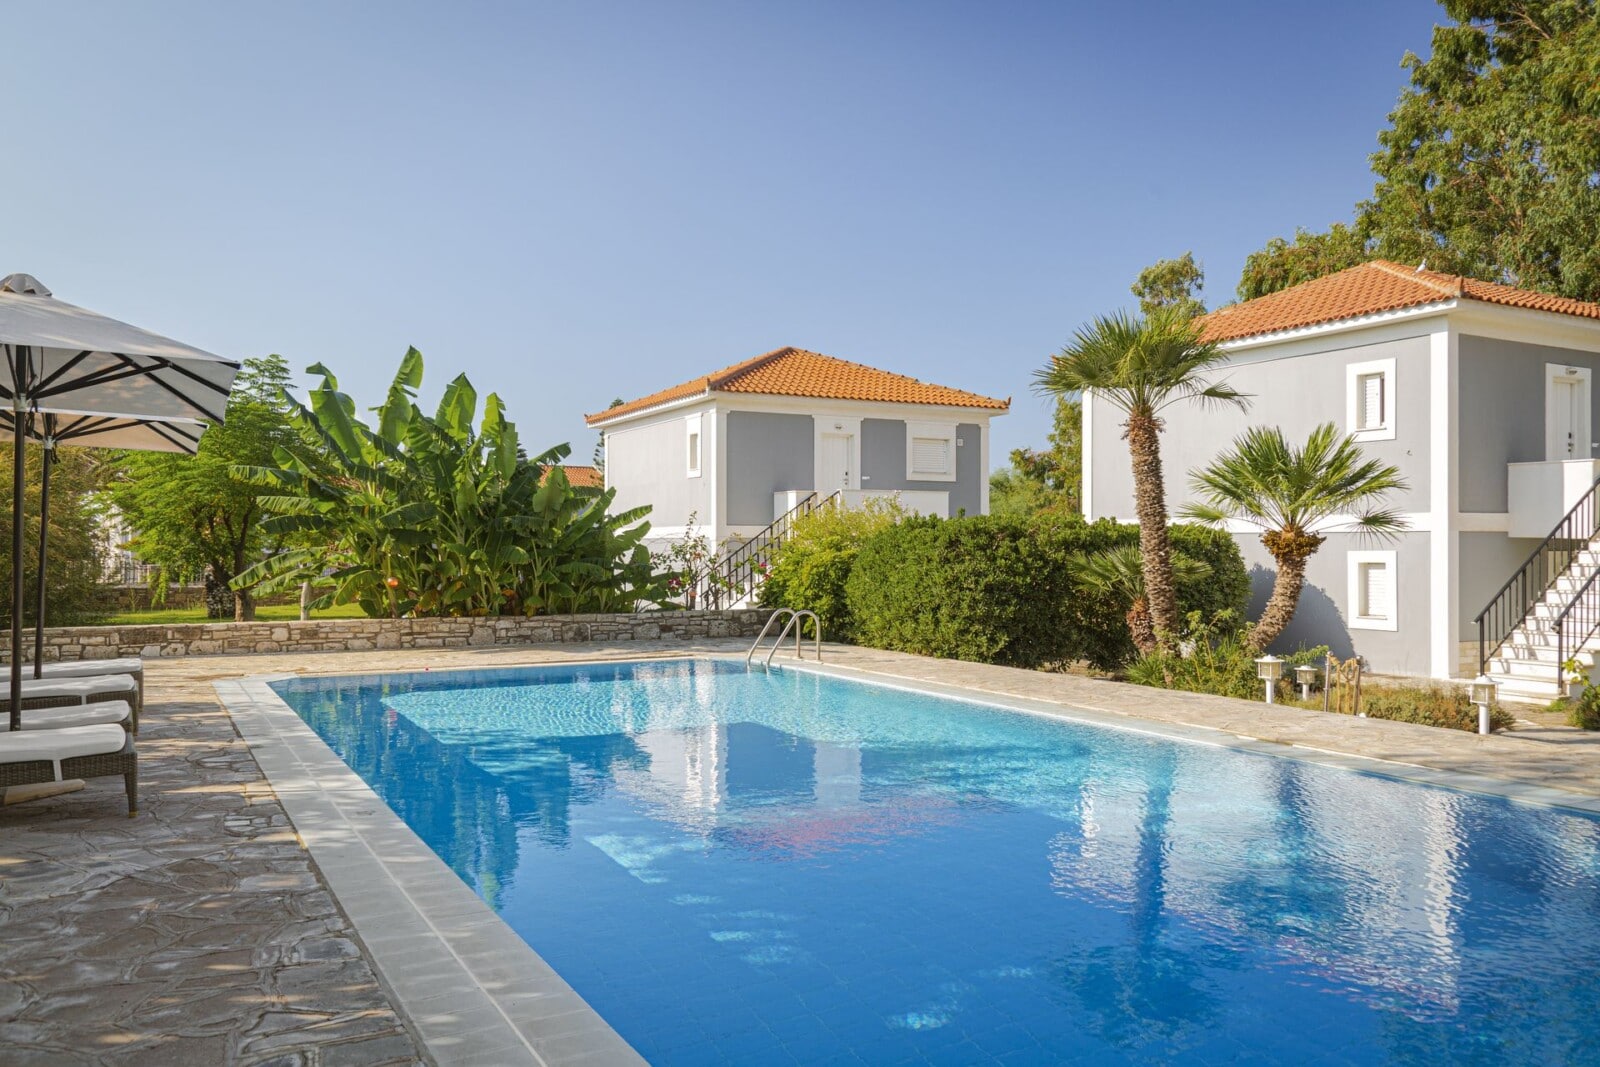 The main pool at Doryssa Coast Apartments, part of the group's luxury hotels in Samos